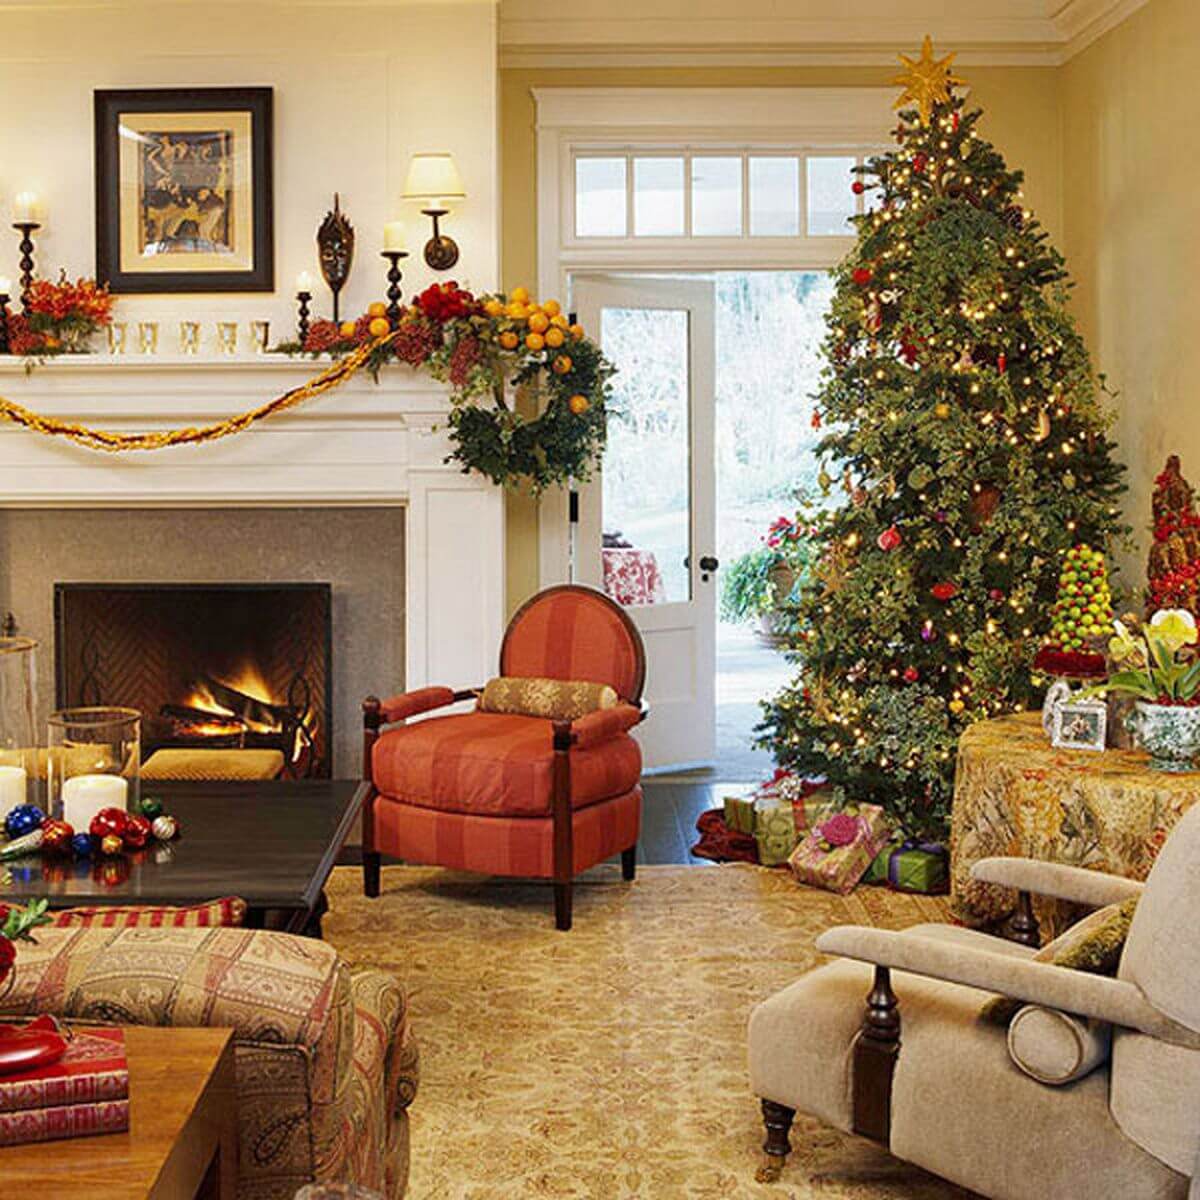 Decorate the living room for Christmas